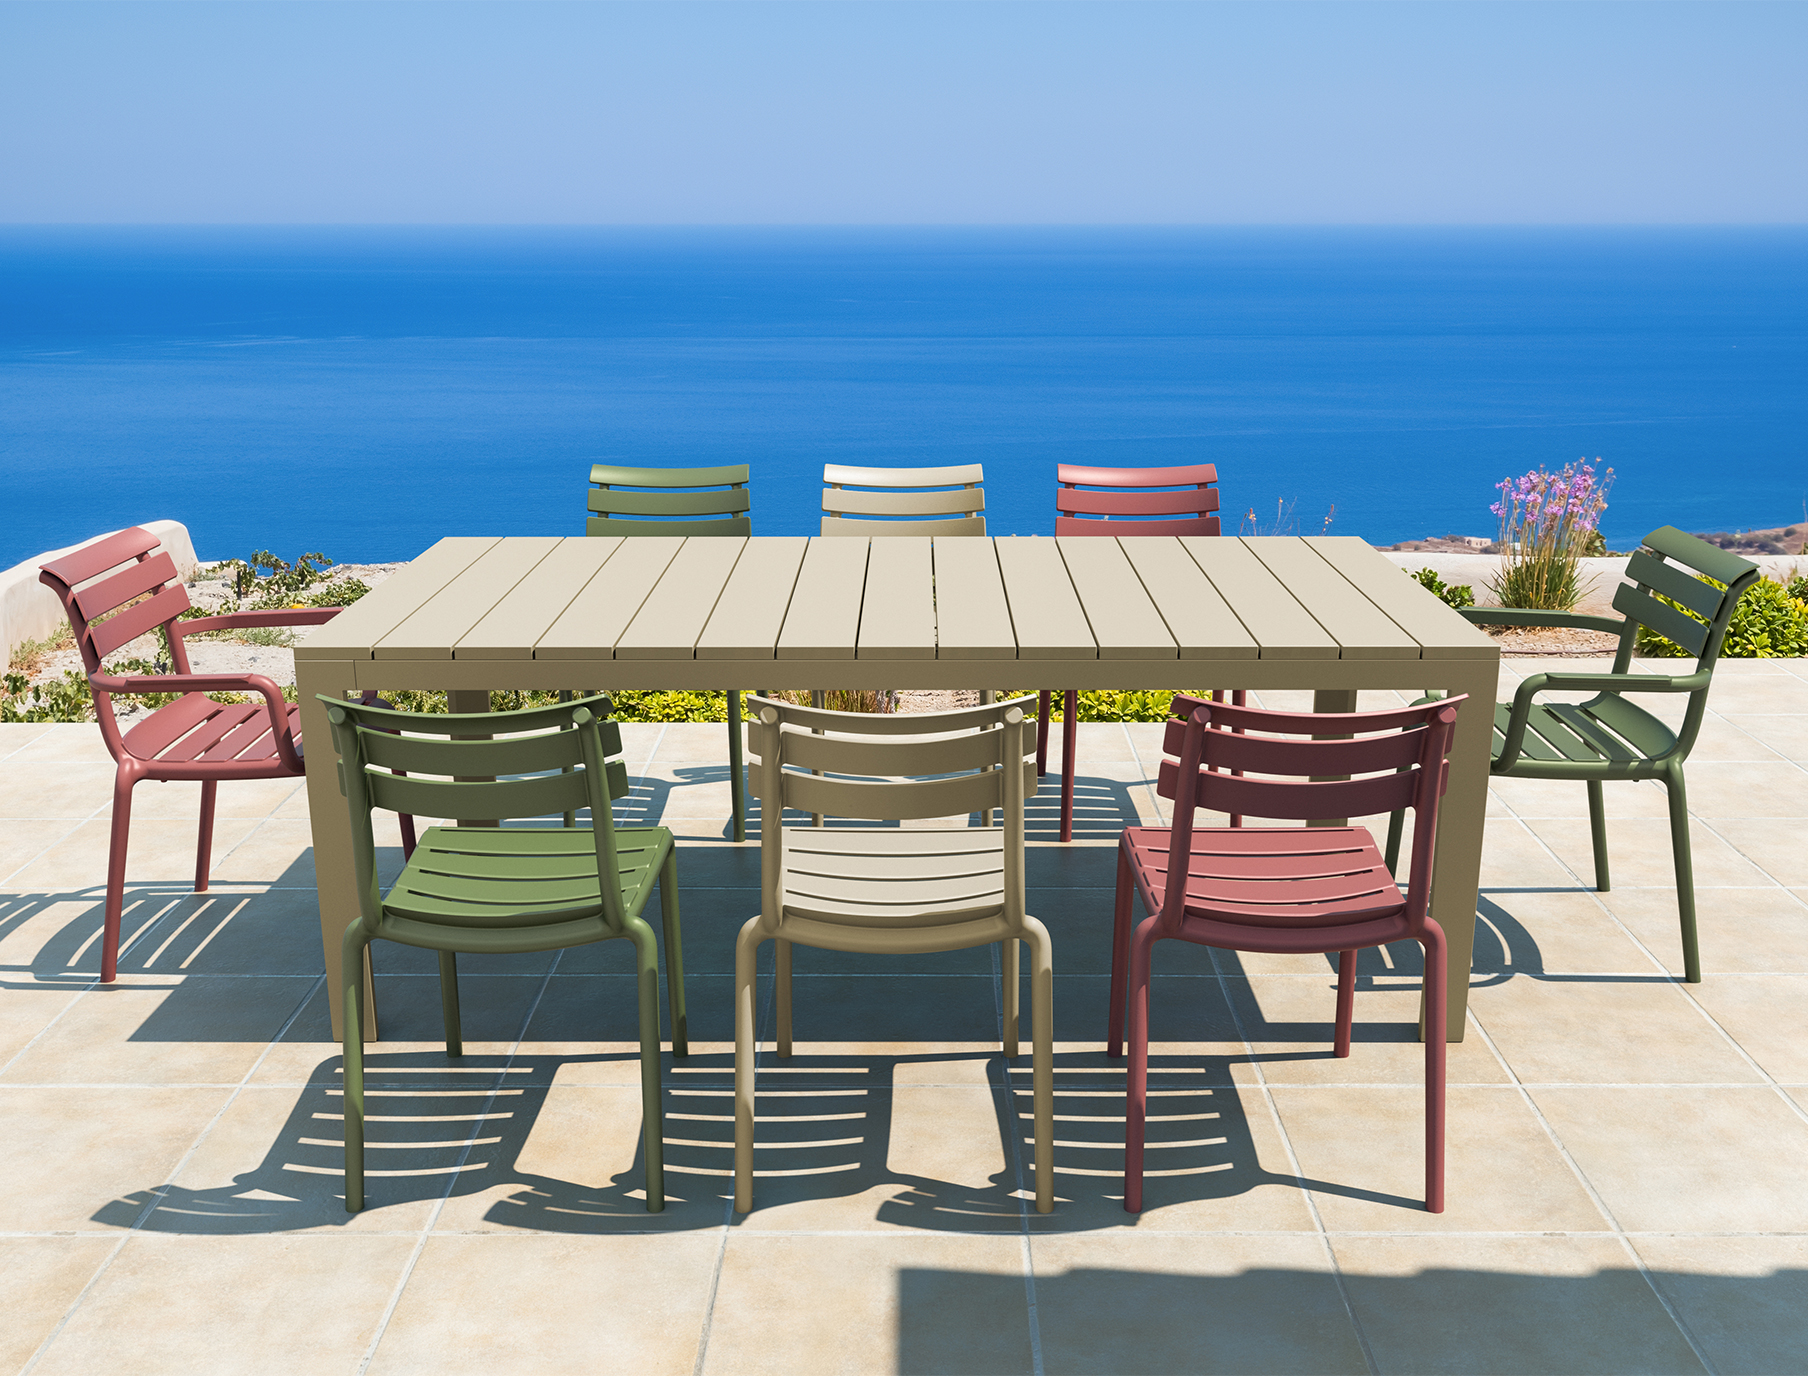 https://outdoorfurnitureonline.com.au/wp-content/uploads/2023/06/outdoor-furniture-online-Atlantic-Outdoor-Extendable-Table-2100-2800mm-taupe.jpg